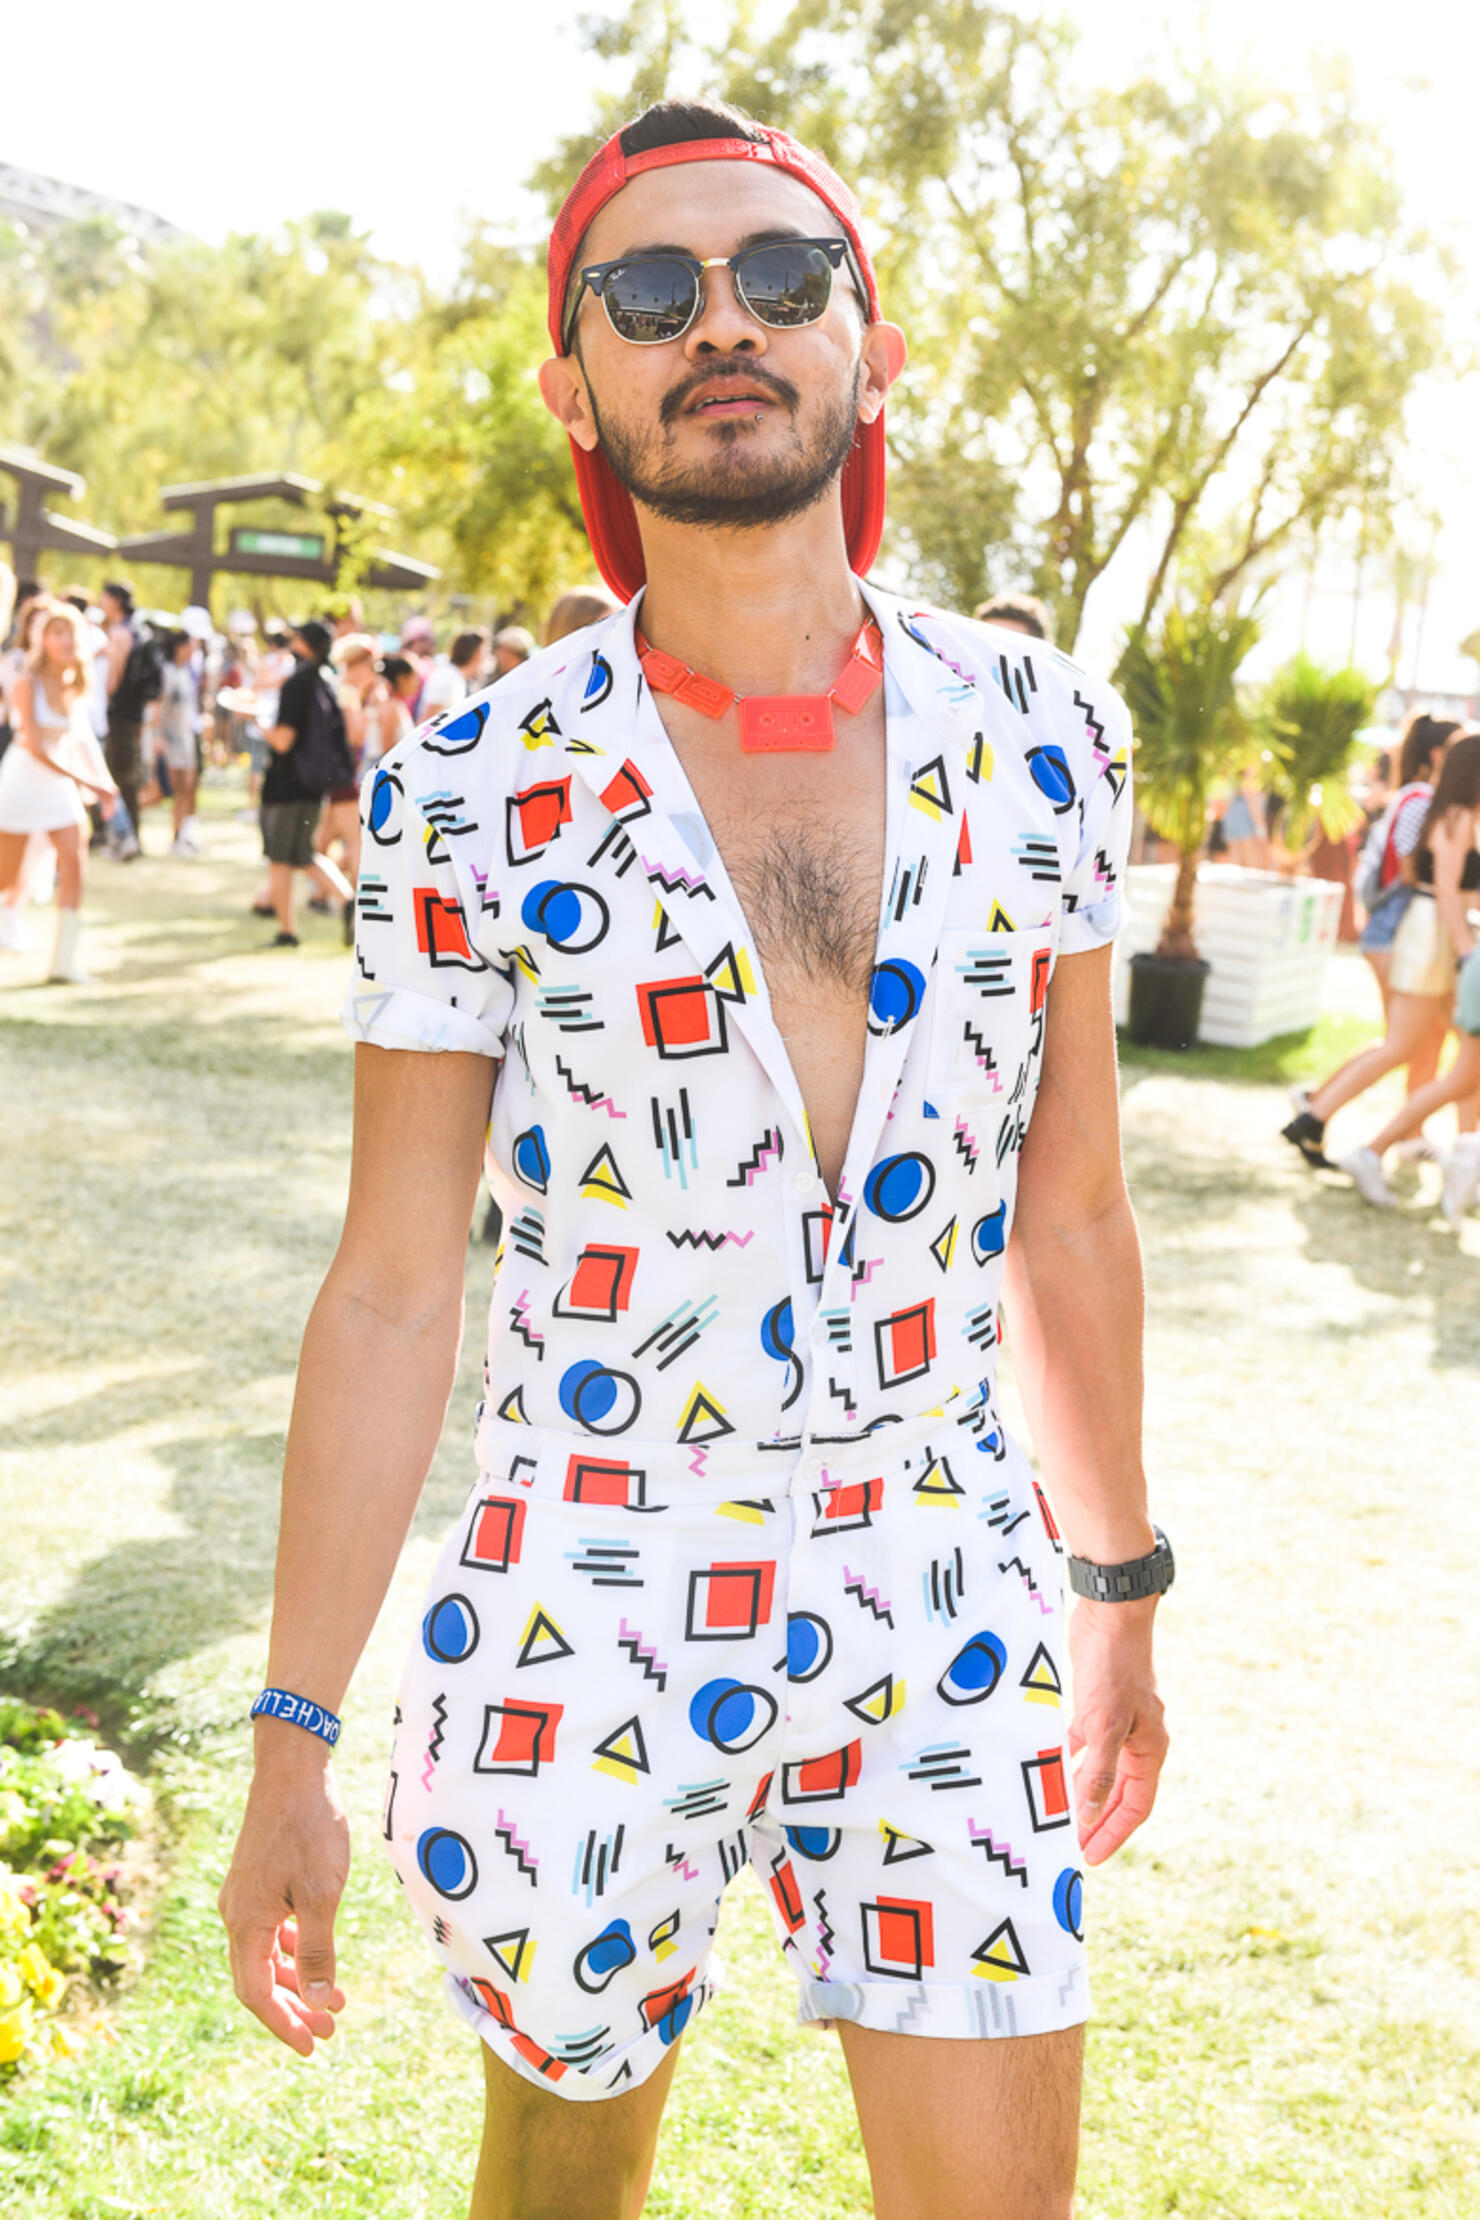 Street Style At The 2018 Coachella Valley Music And Arts Festival - Weekend 1